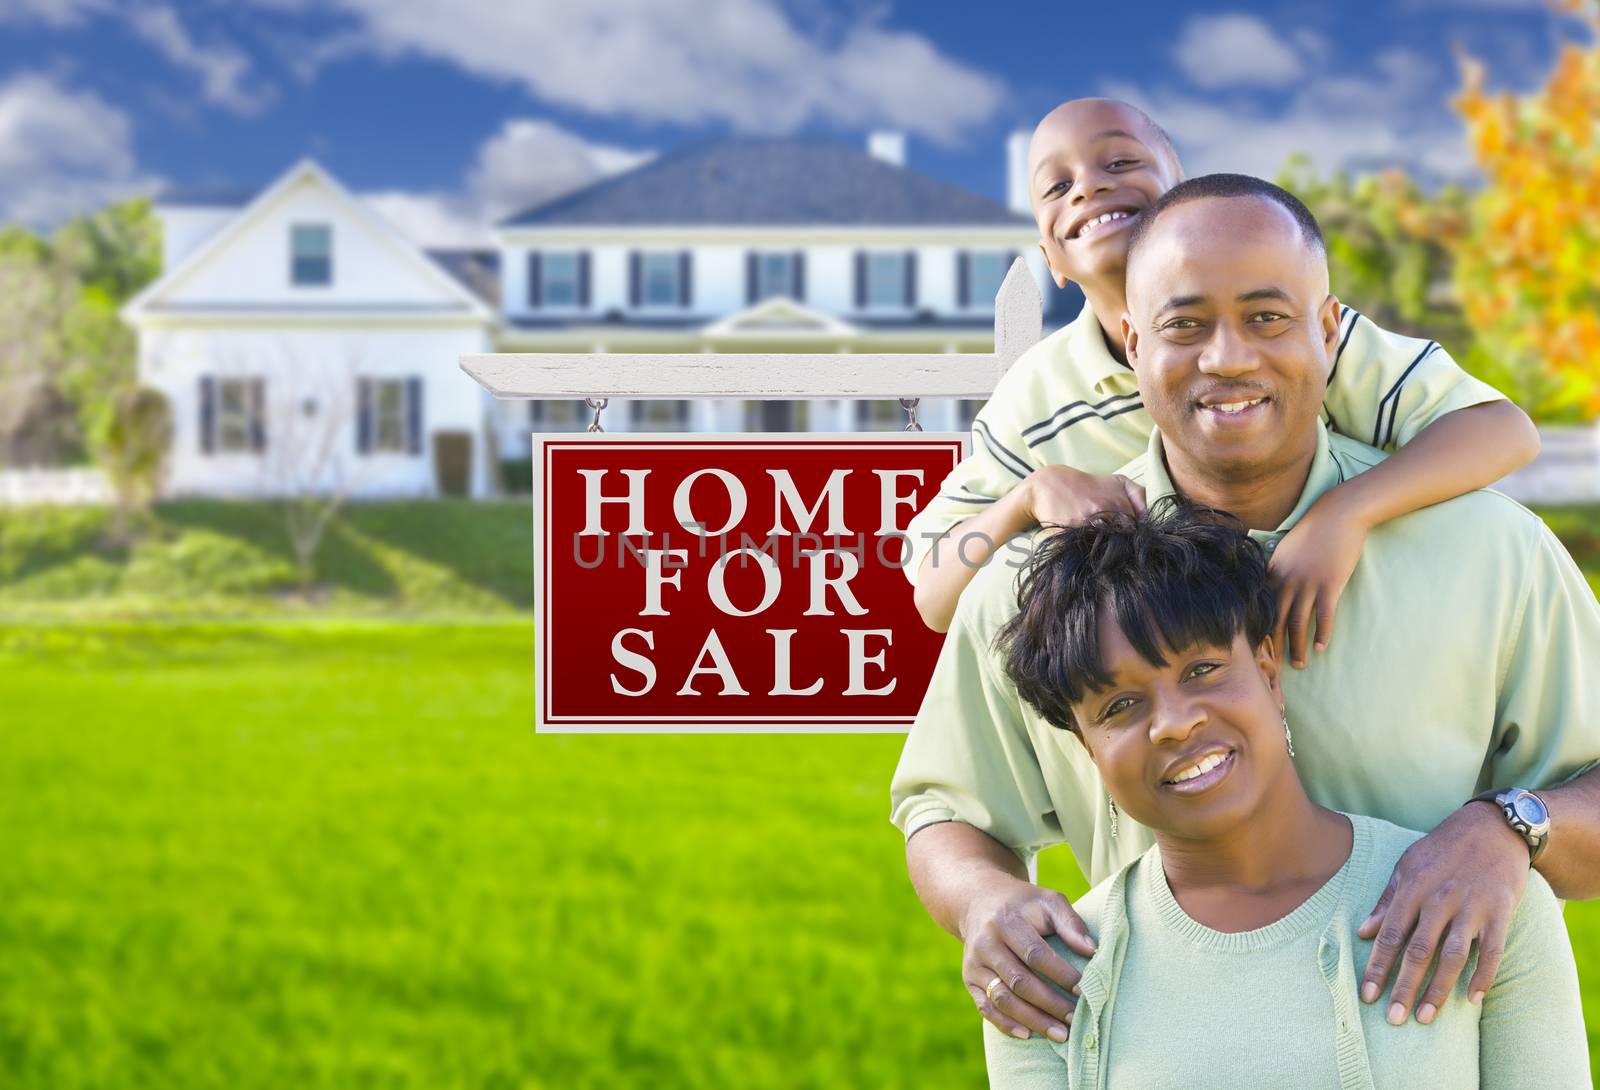 Happy African American Family In Front of For Sale Real Estate Sign and House.